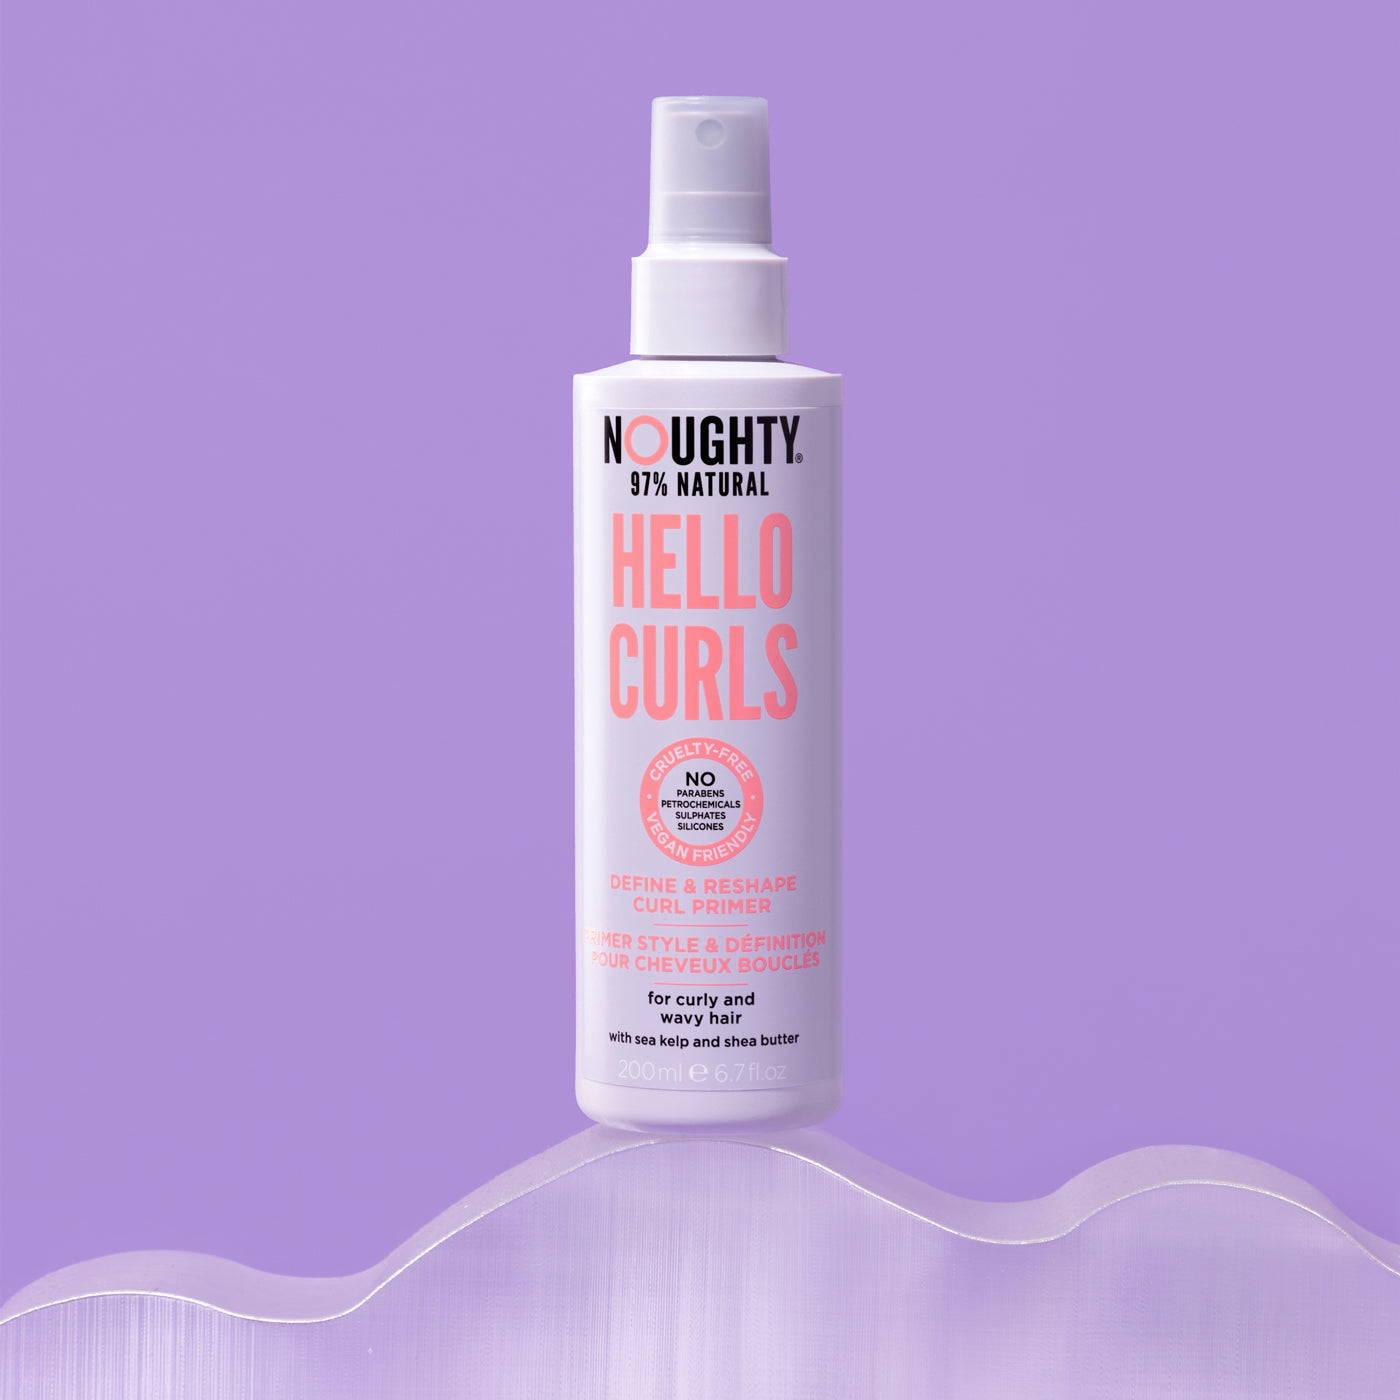 Noughty hello curls curl primer prep and beachy wave spray for curls and wavy hair. Natural haircare vegan cruelty free natural sulfate free paraben free silicone free